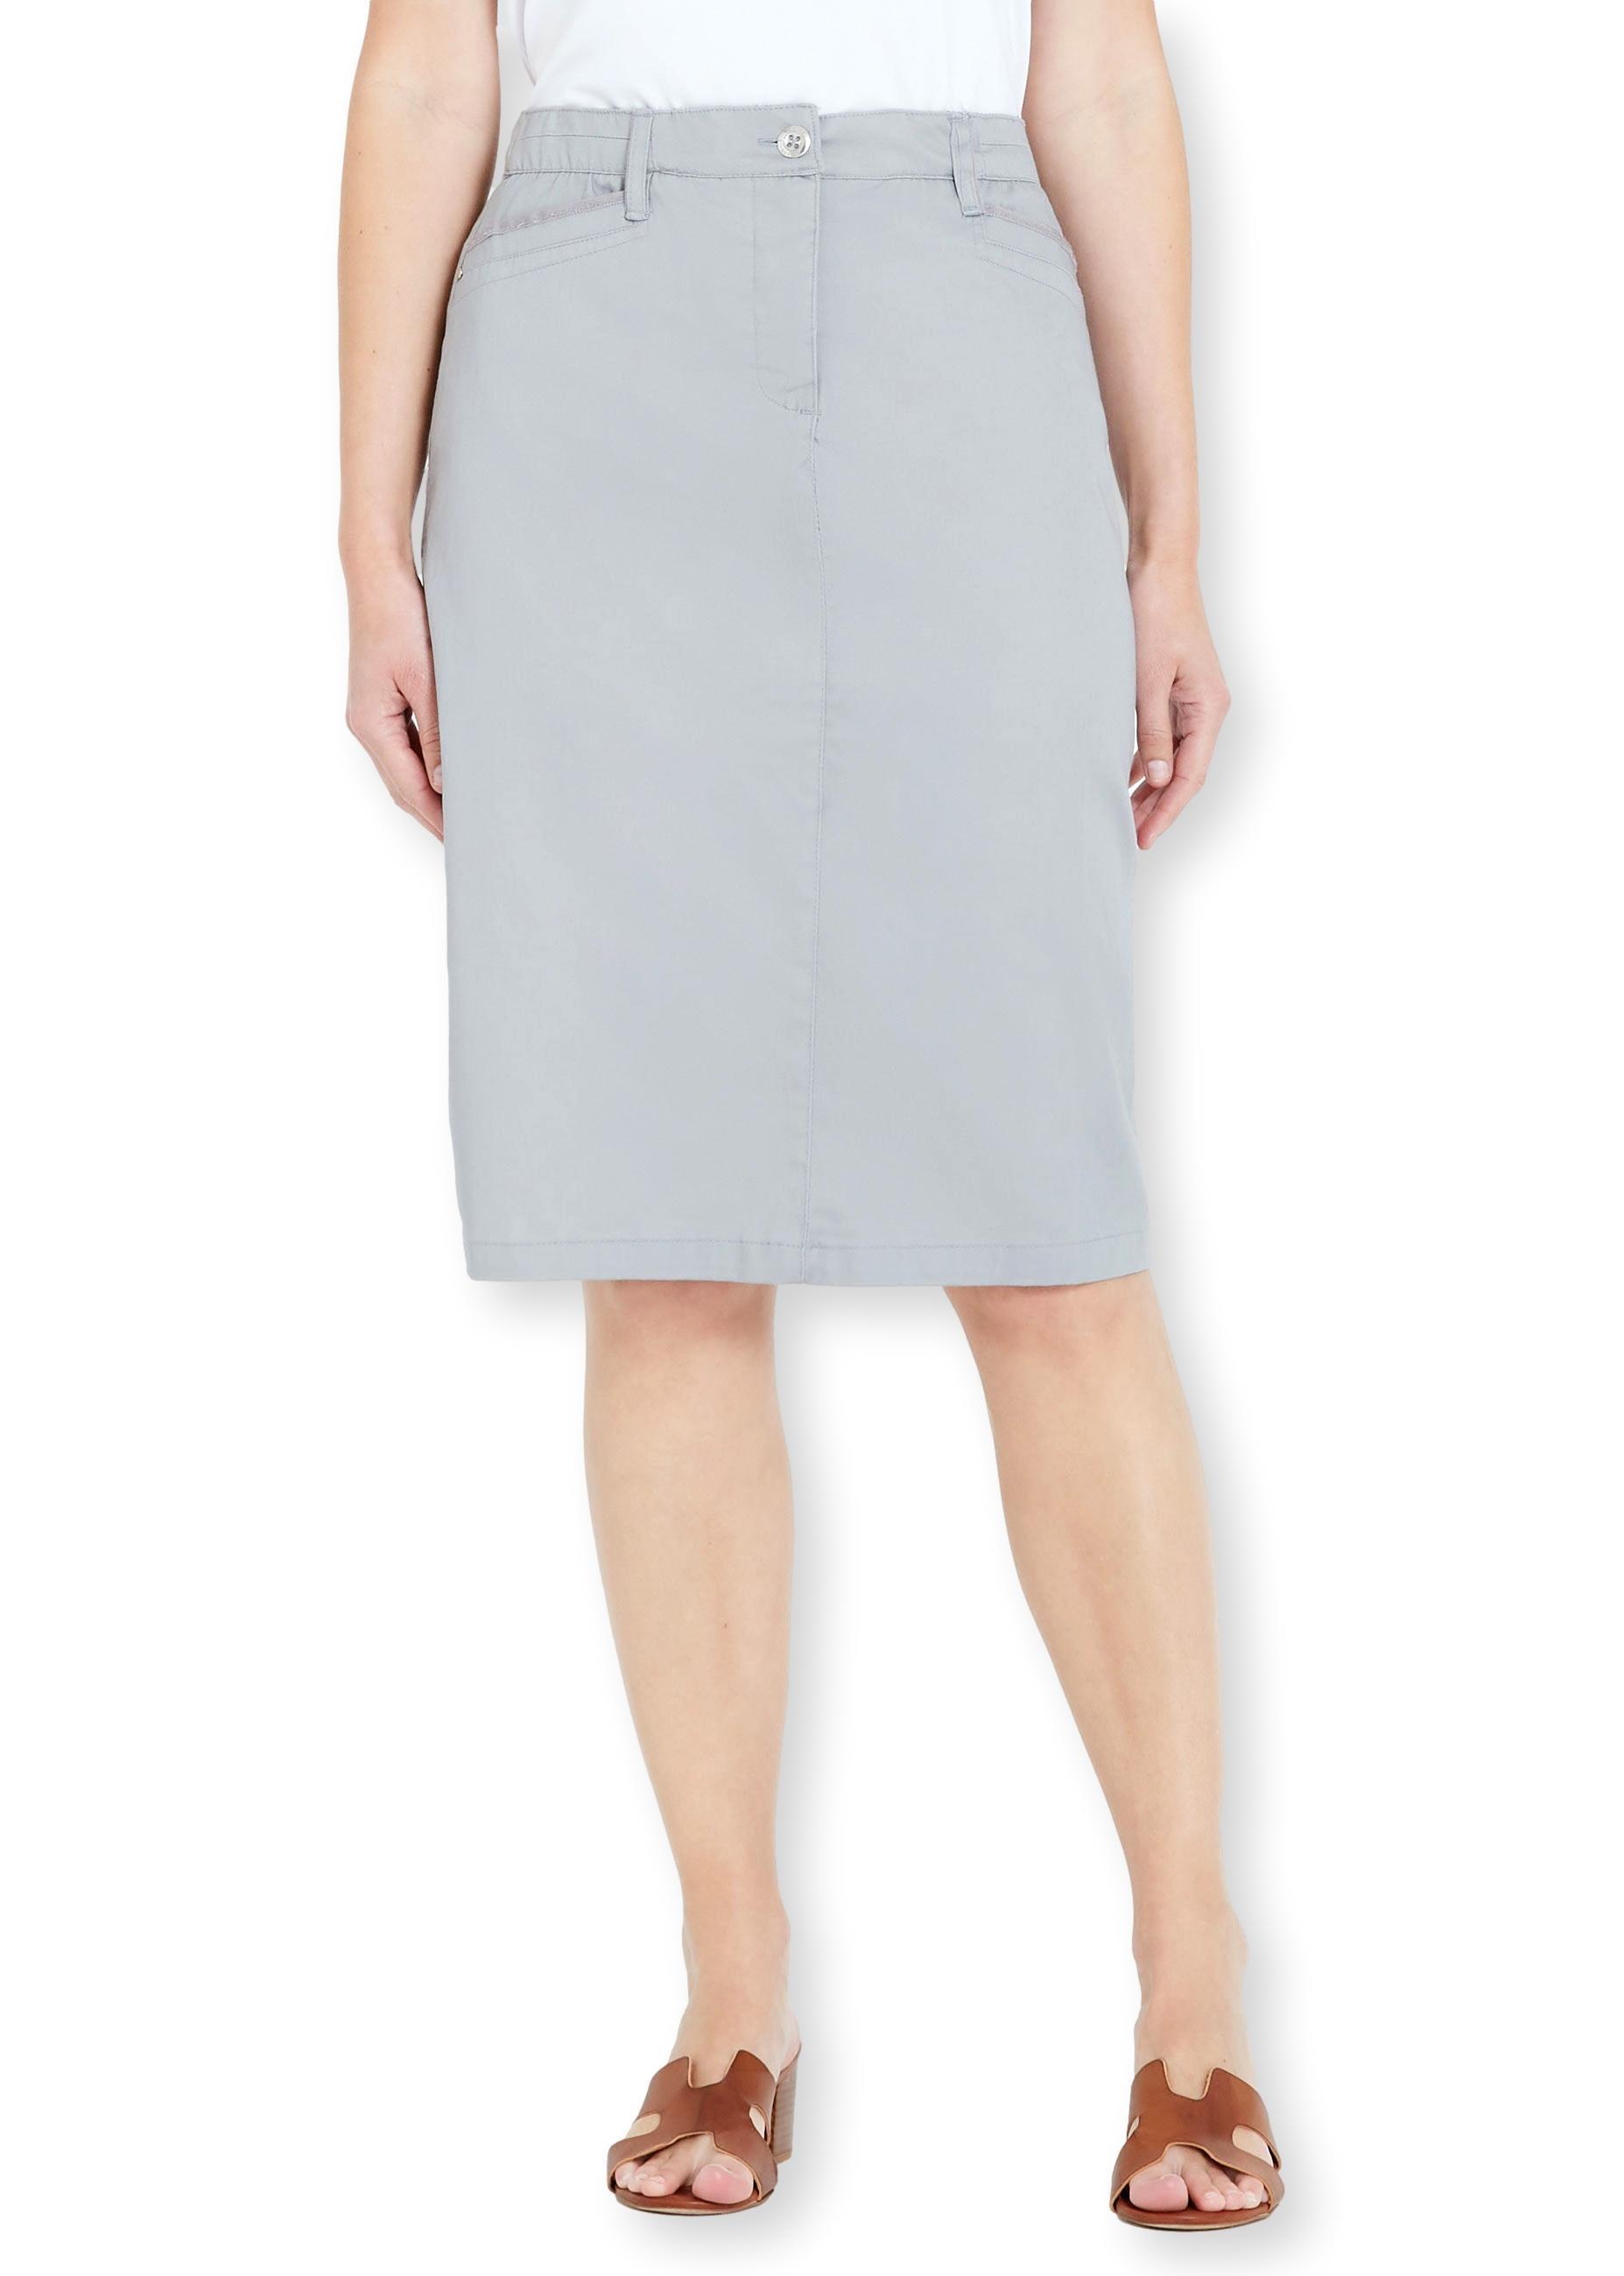 W LANE - Womens Skirts - Midi - Summer - Silver - Cotton - Fashion - Clothes - - Comfort - Knee Length - Casual Fashion - Work Clothes - Office Wear